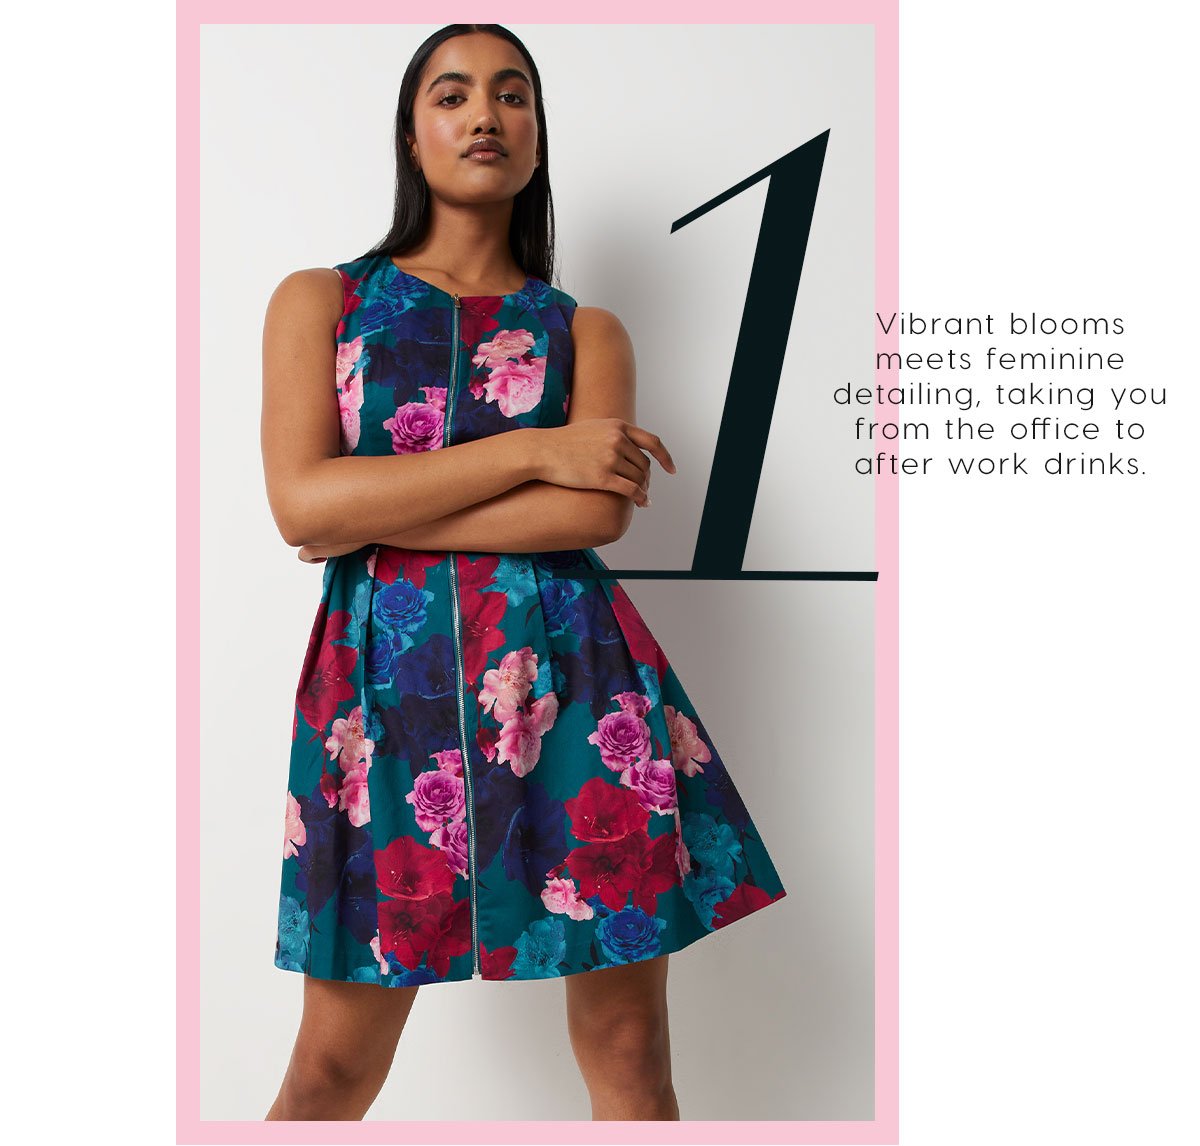 1. Vibrant blooms meets feminine detailing, taking you from the office to after work drinks.